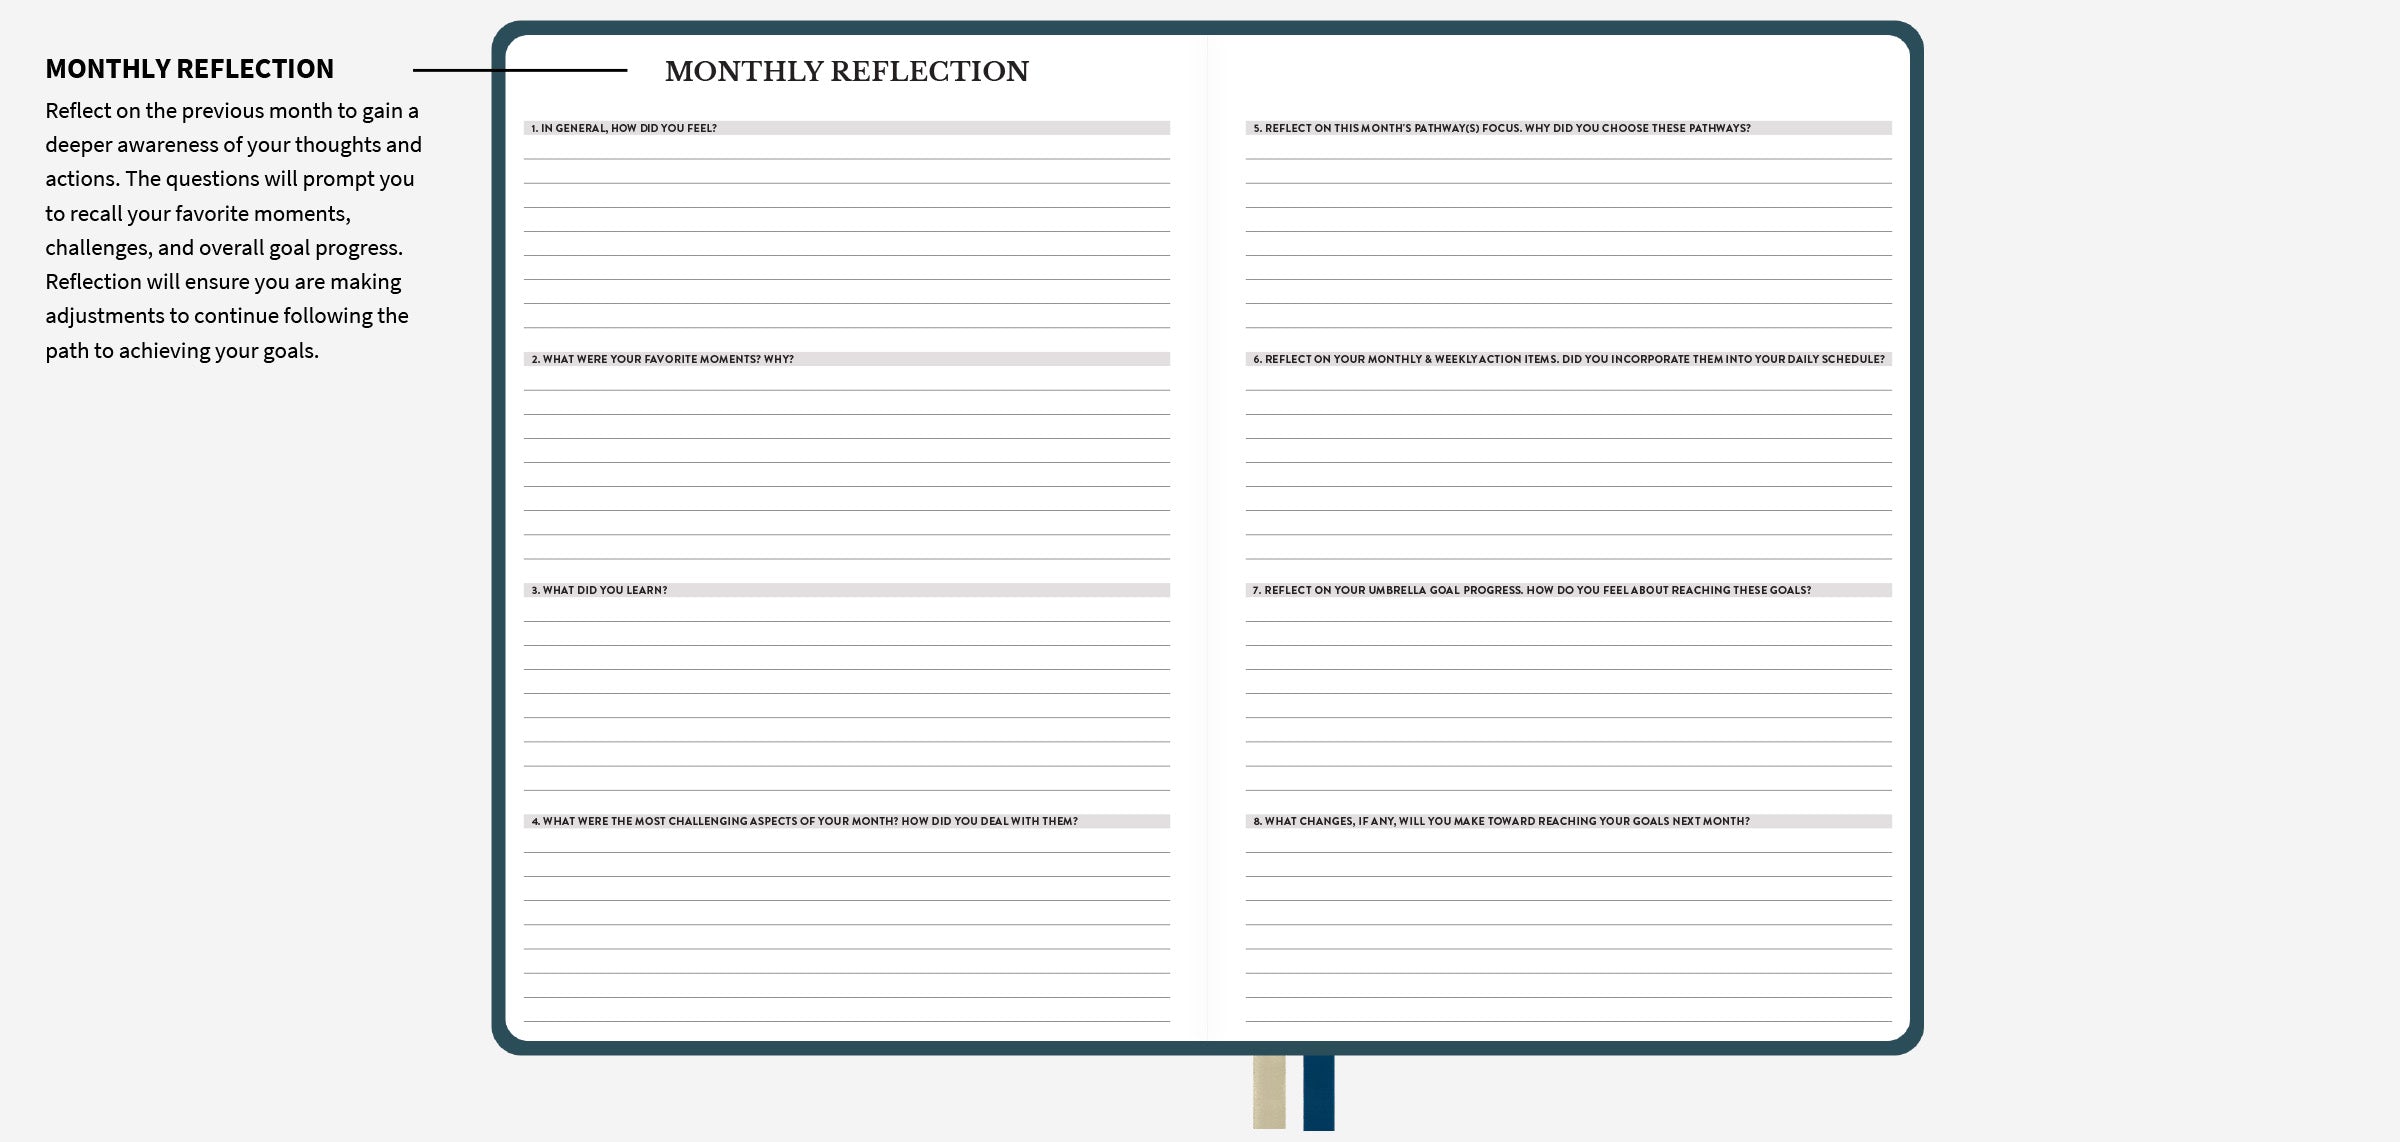 Example of the monthly reflections layout